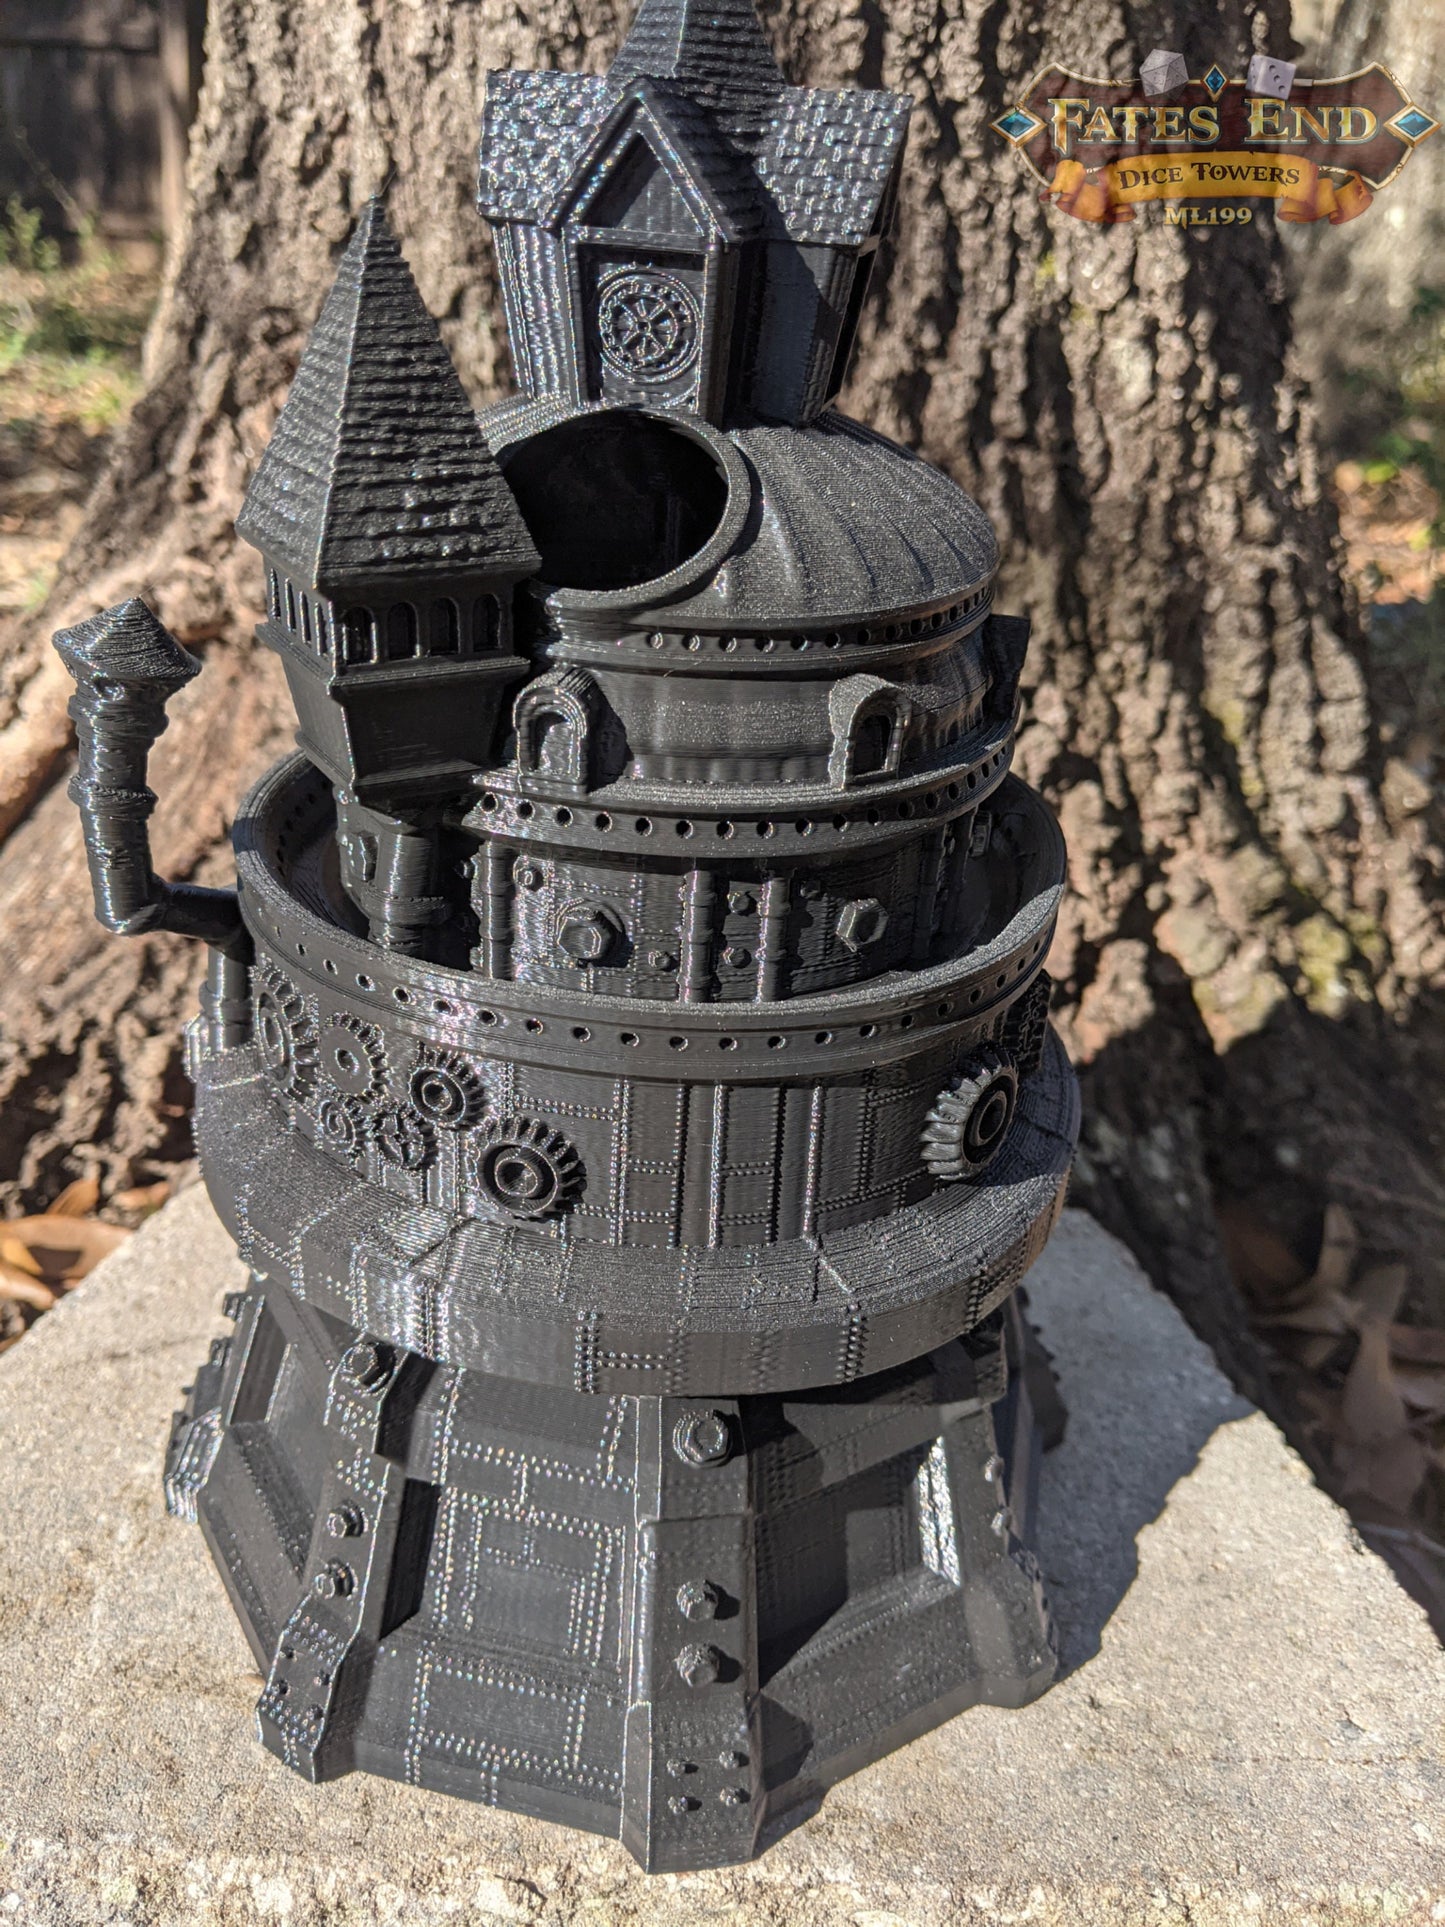 Artificer Class Steampunk 3D Printed Dice Tower- Fate's End - Embrace Precision with a Masterpiece of Dice-Rolling Ingenuity